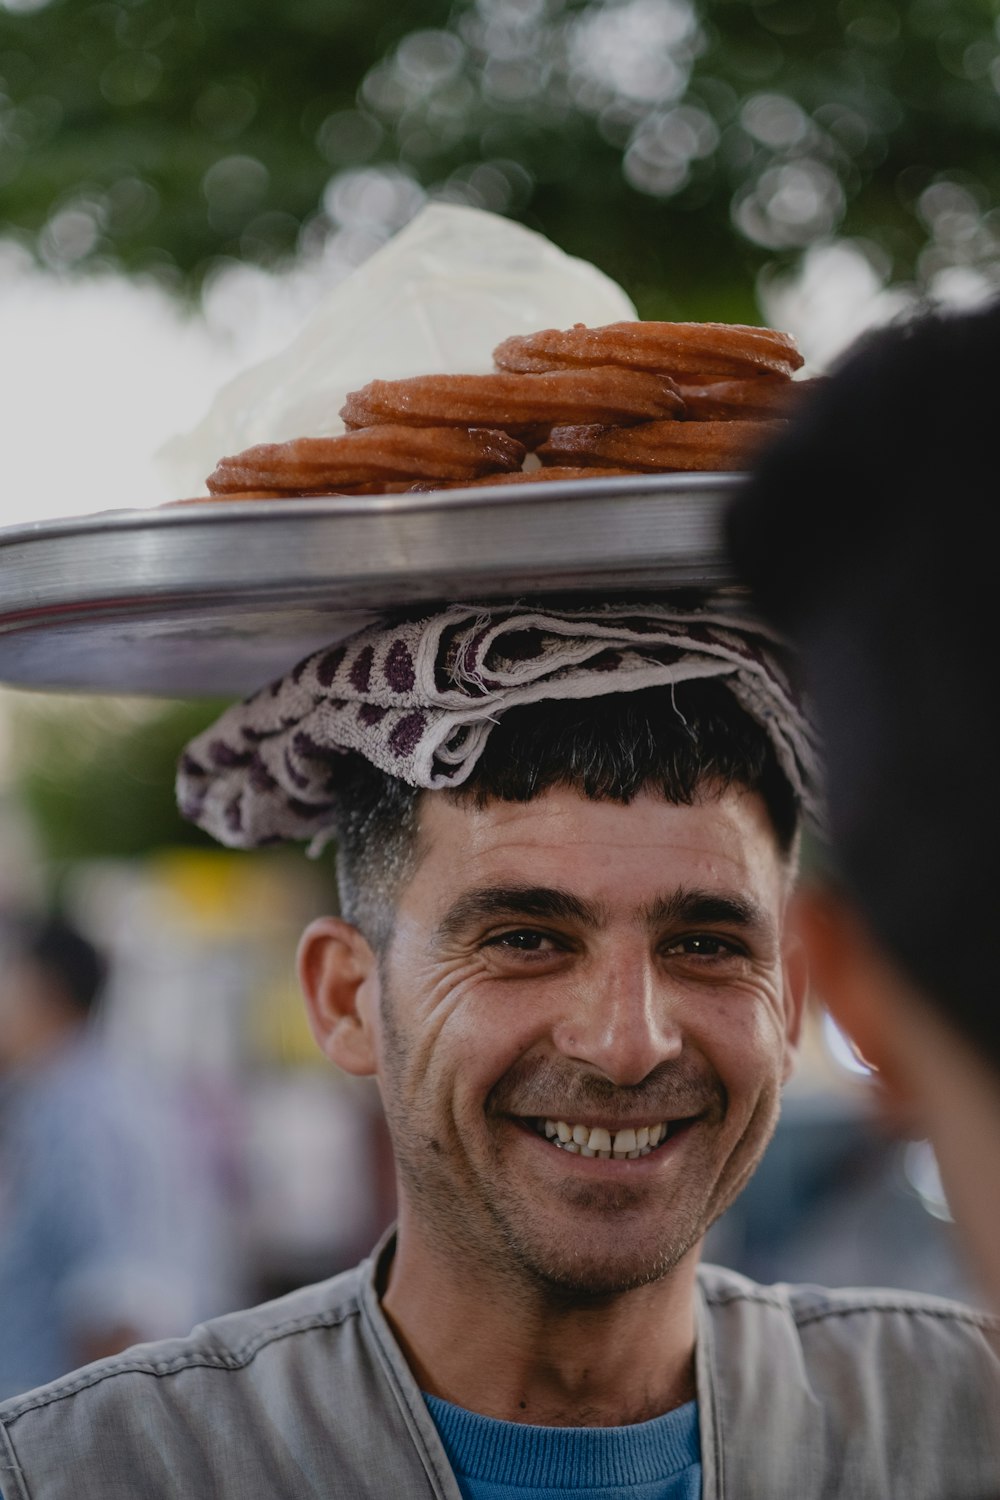 a man with a tray of food on his head